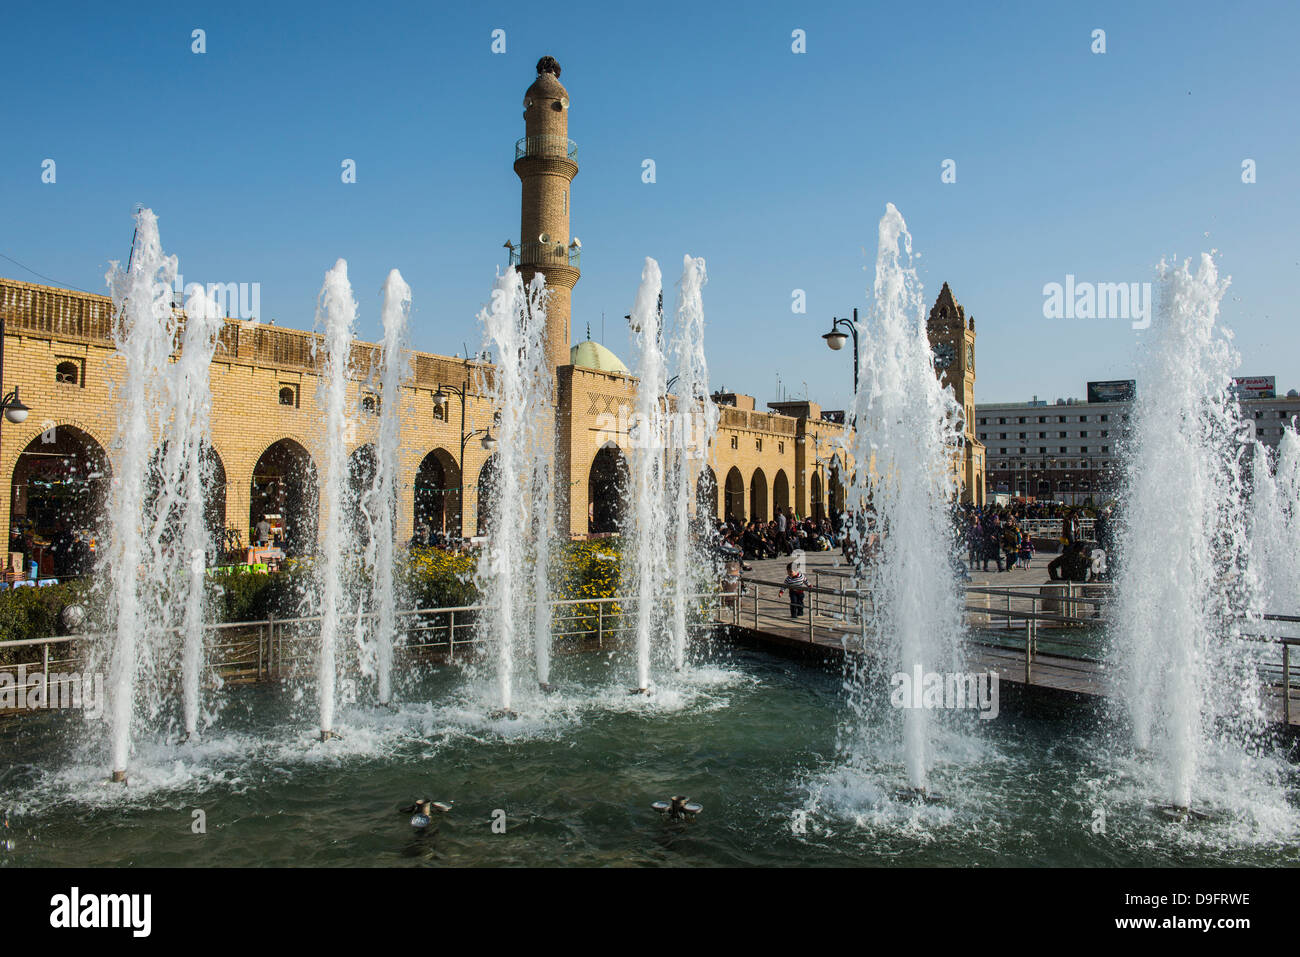 Huge square with water fountains below the citadel of Erbil (Hawler), capital of Iraq Kurdistan, Iraq, Middle East Stock Photo